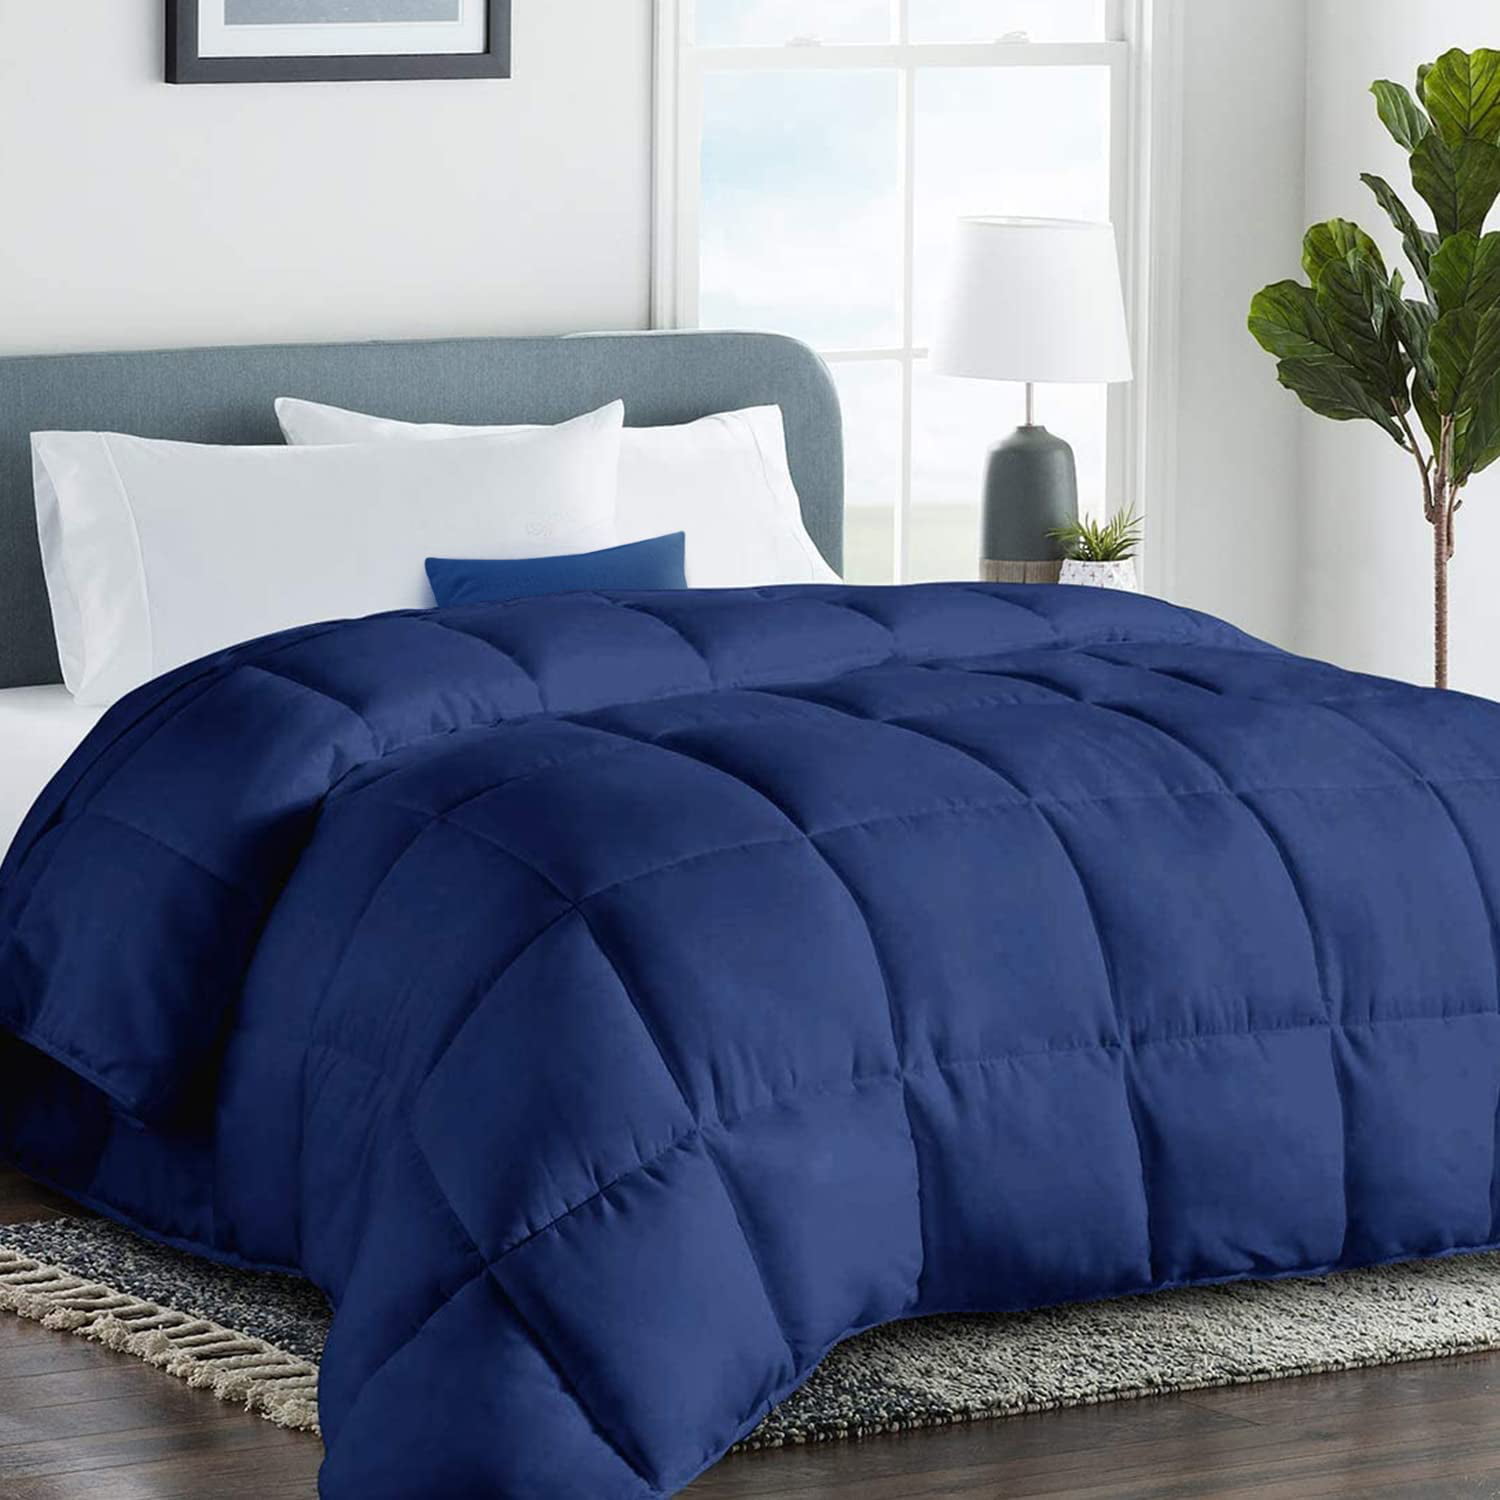 Details about   MOONCAST All Season Comforter Soft Quilted Down Alternative Summer Cooling Duvet 